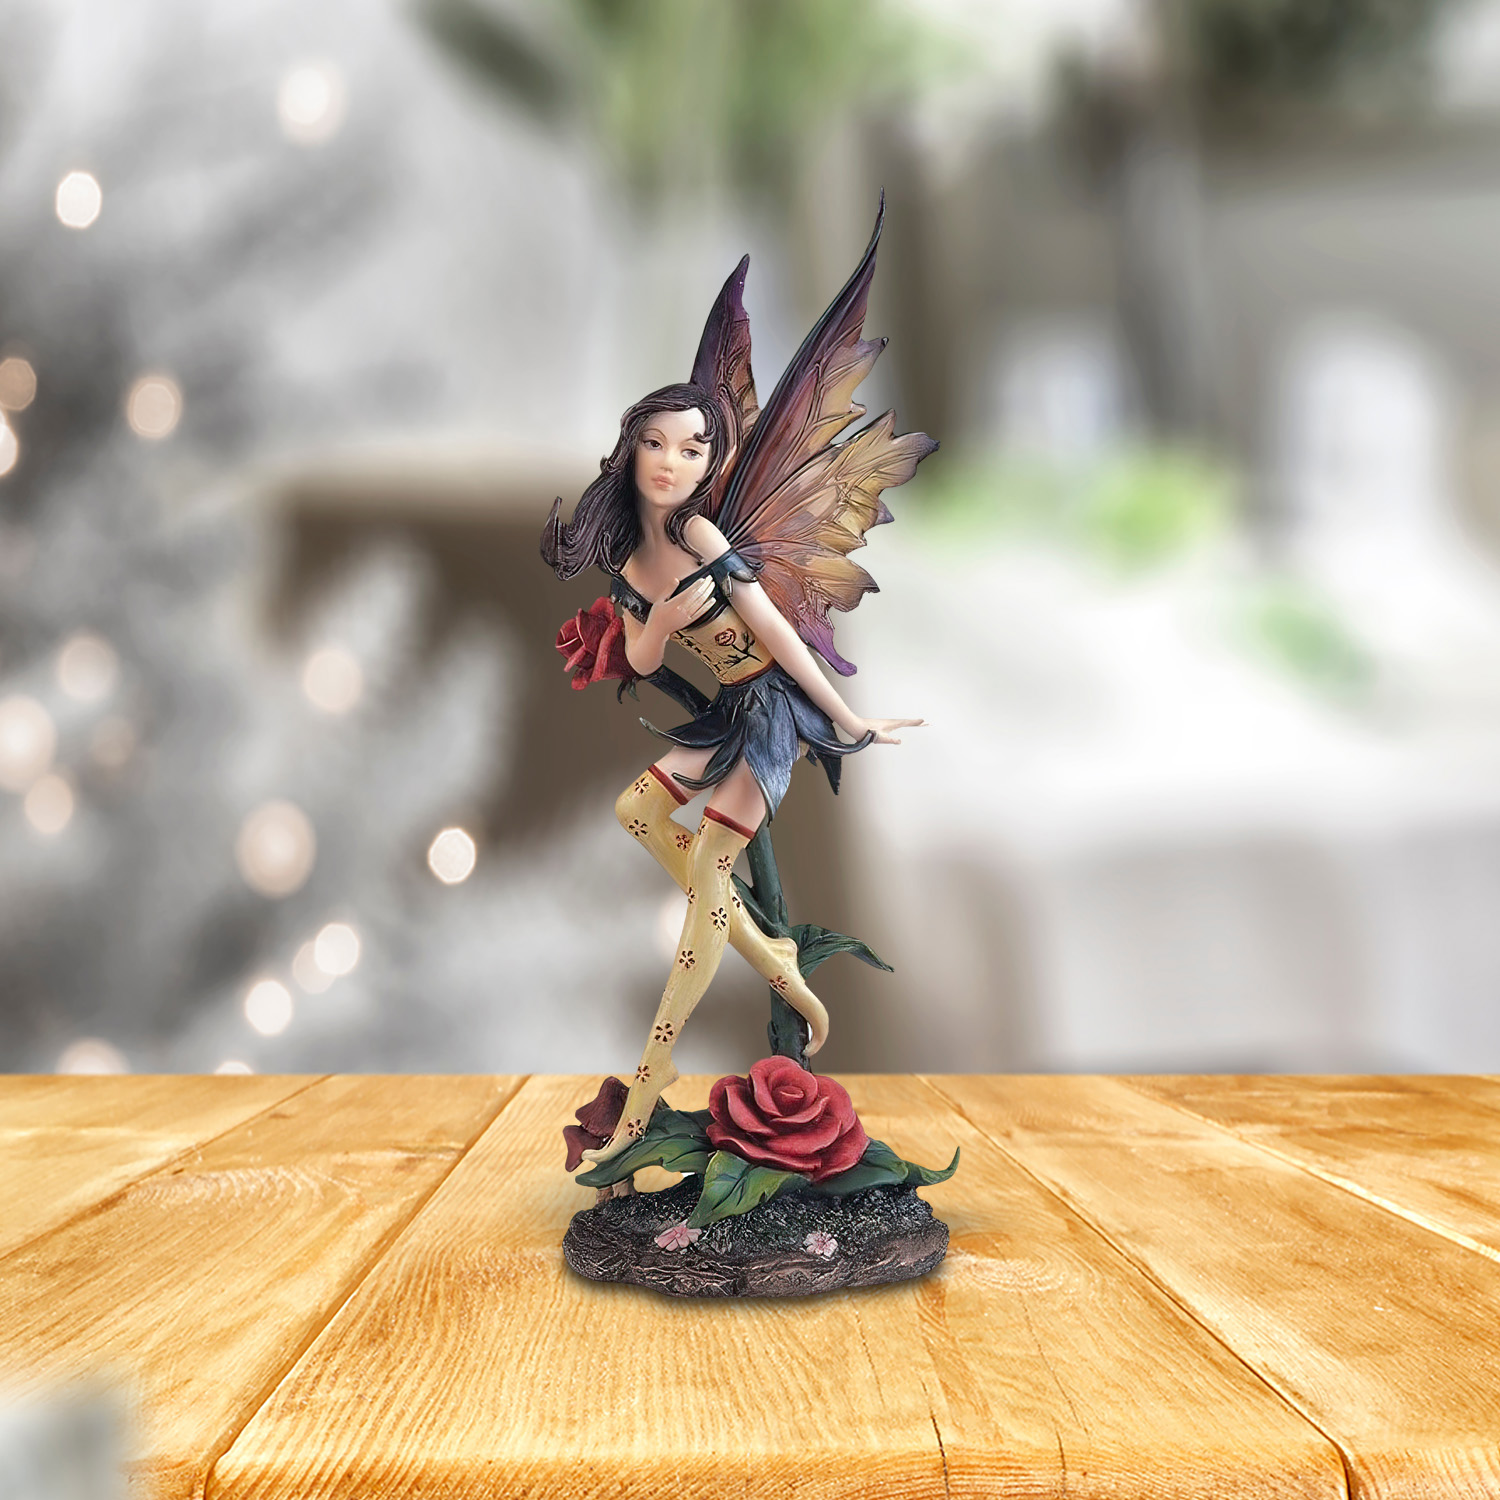 

10"h Blue/yellow Fairy With Roses And Clear Wings Figurine Statue Home/room Decor And Perfect Gift Ideas For House Warming, Holidays And Birthdays Great Collectible Addition